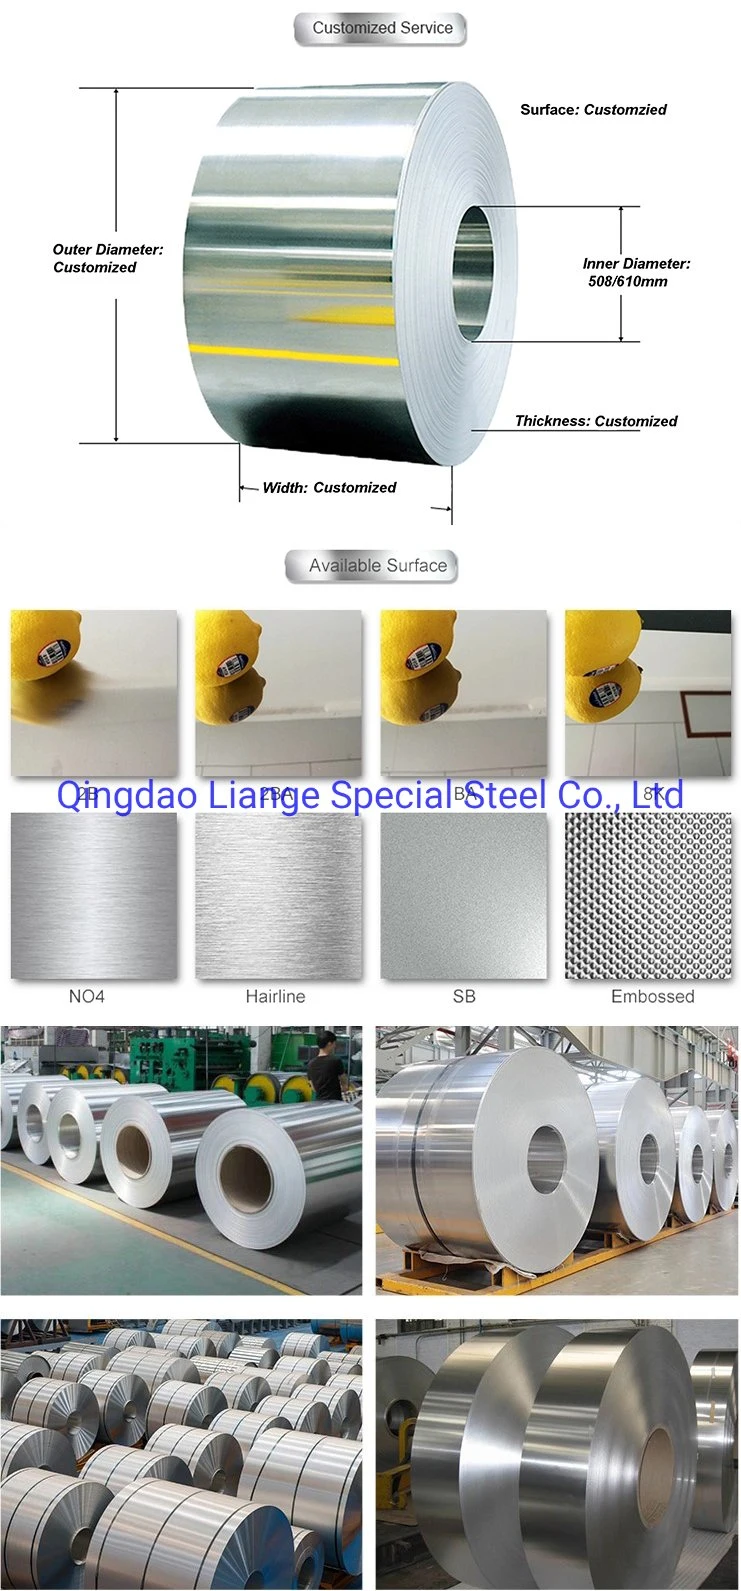 High Quanlity Stainless Steel Material Supplier Offers Stainless Steel Flat Plate, Stainless Steel Coil and Other Stainless Steel Products Price